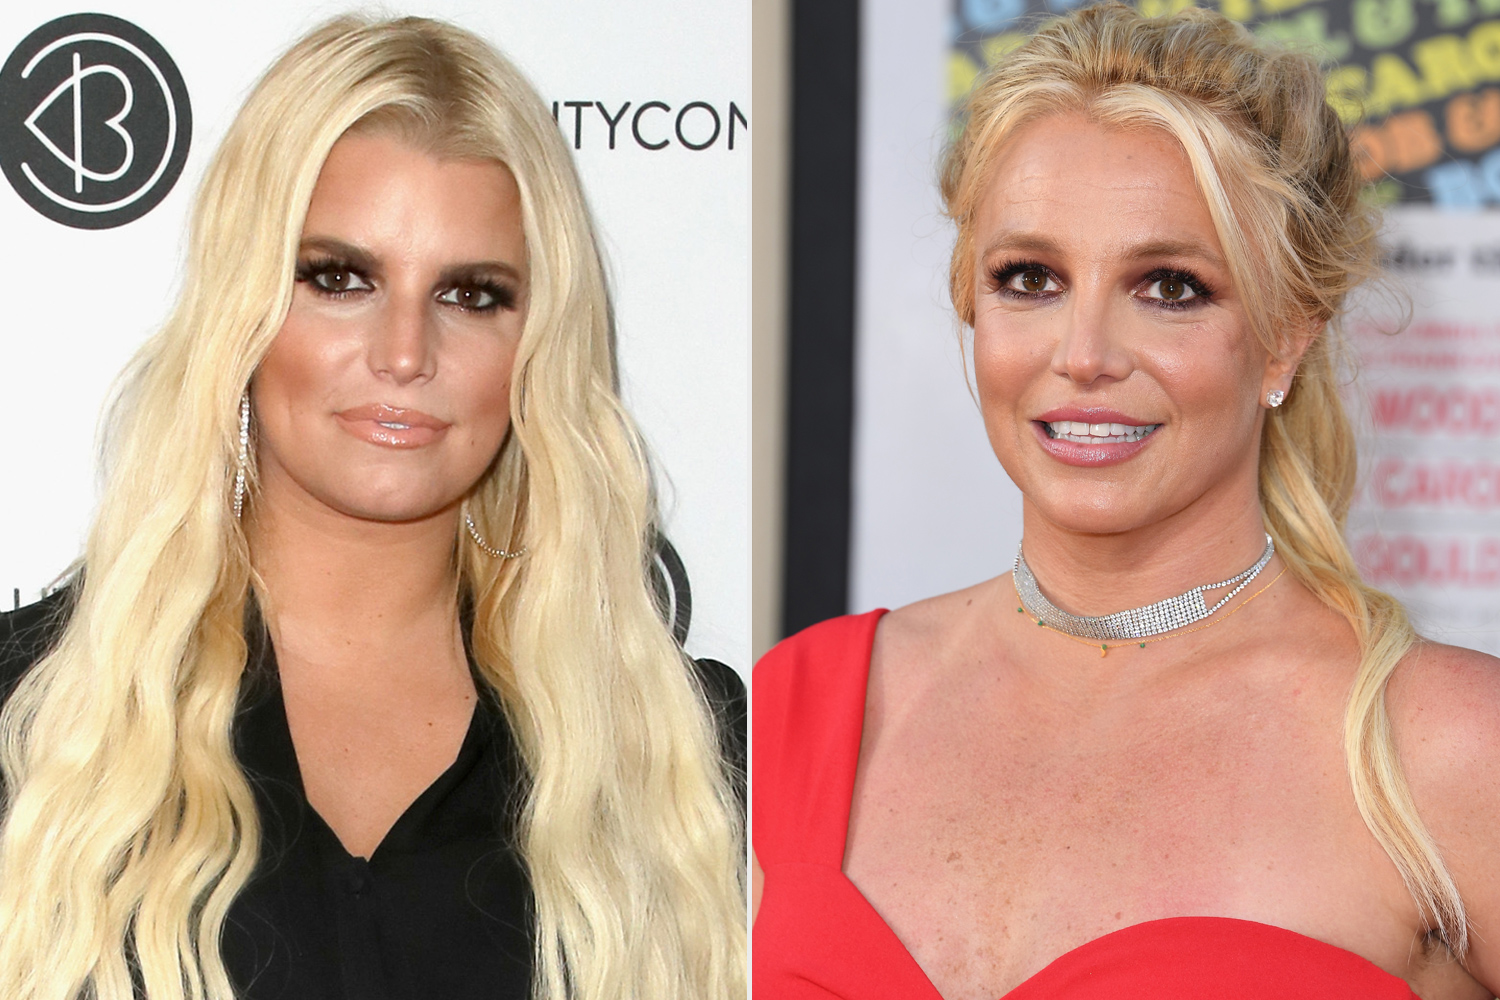 Jessica Simpson says she admires Britney Spears' 'strength' and 'capability to live unapologetically'